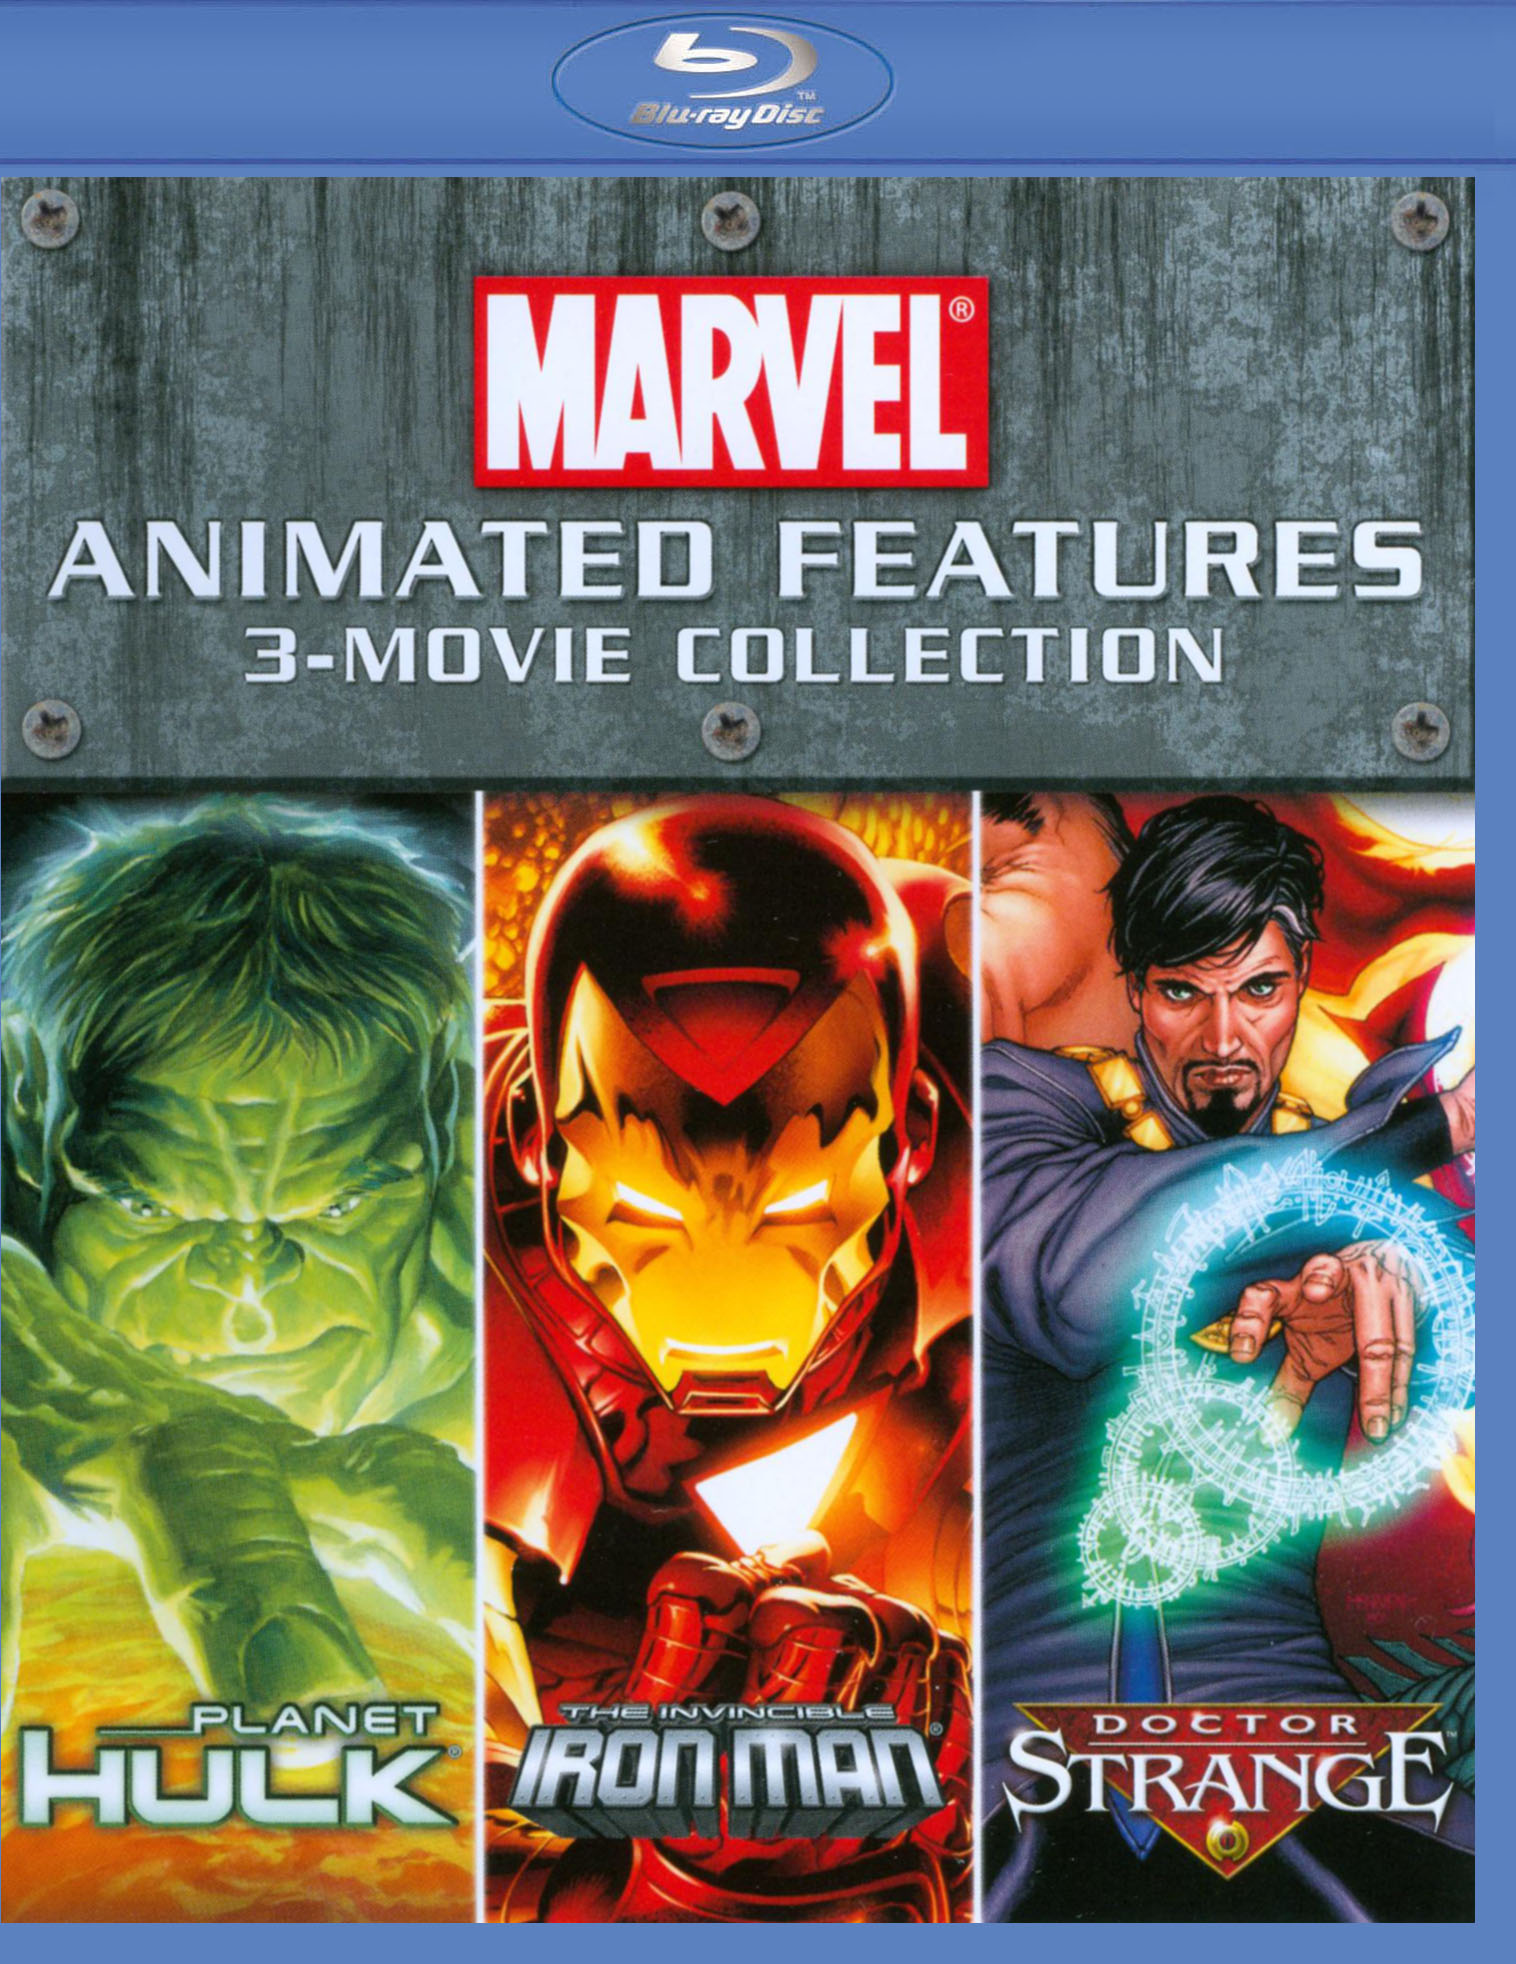 Marvel Animated Features 3-Movie Collection [3 Discs] [Blu-ray] - Best Buy